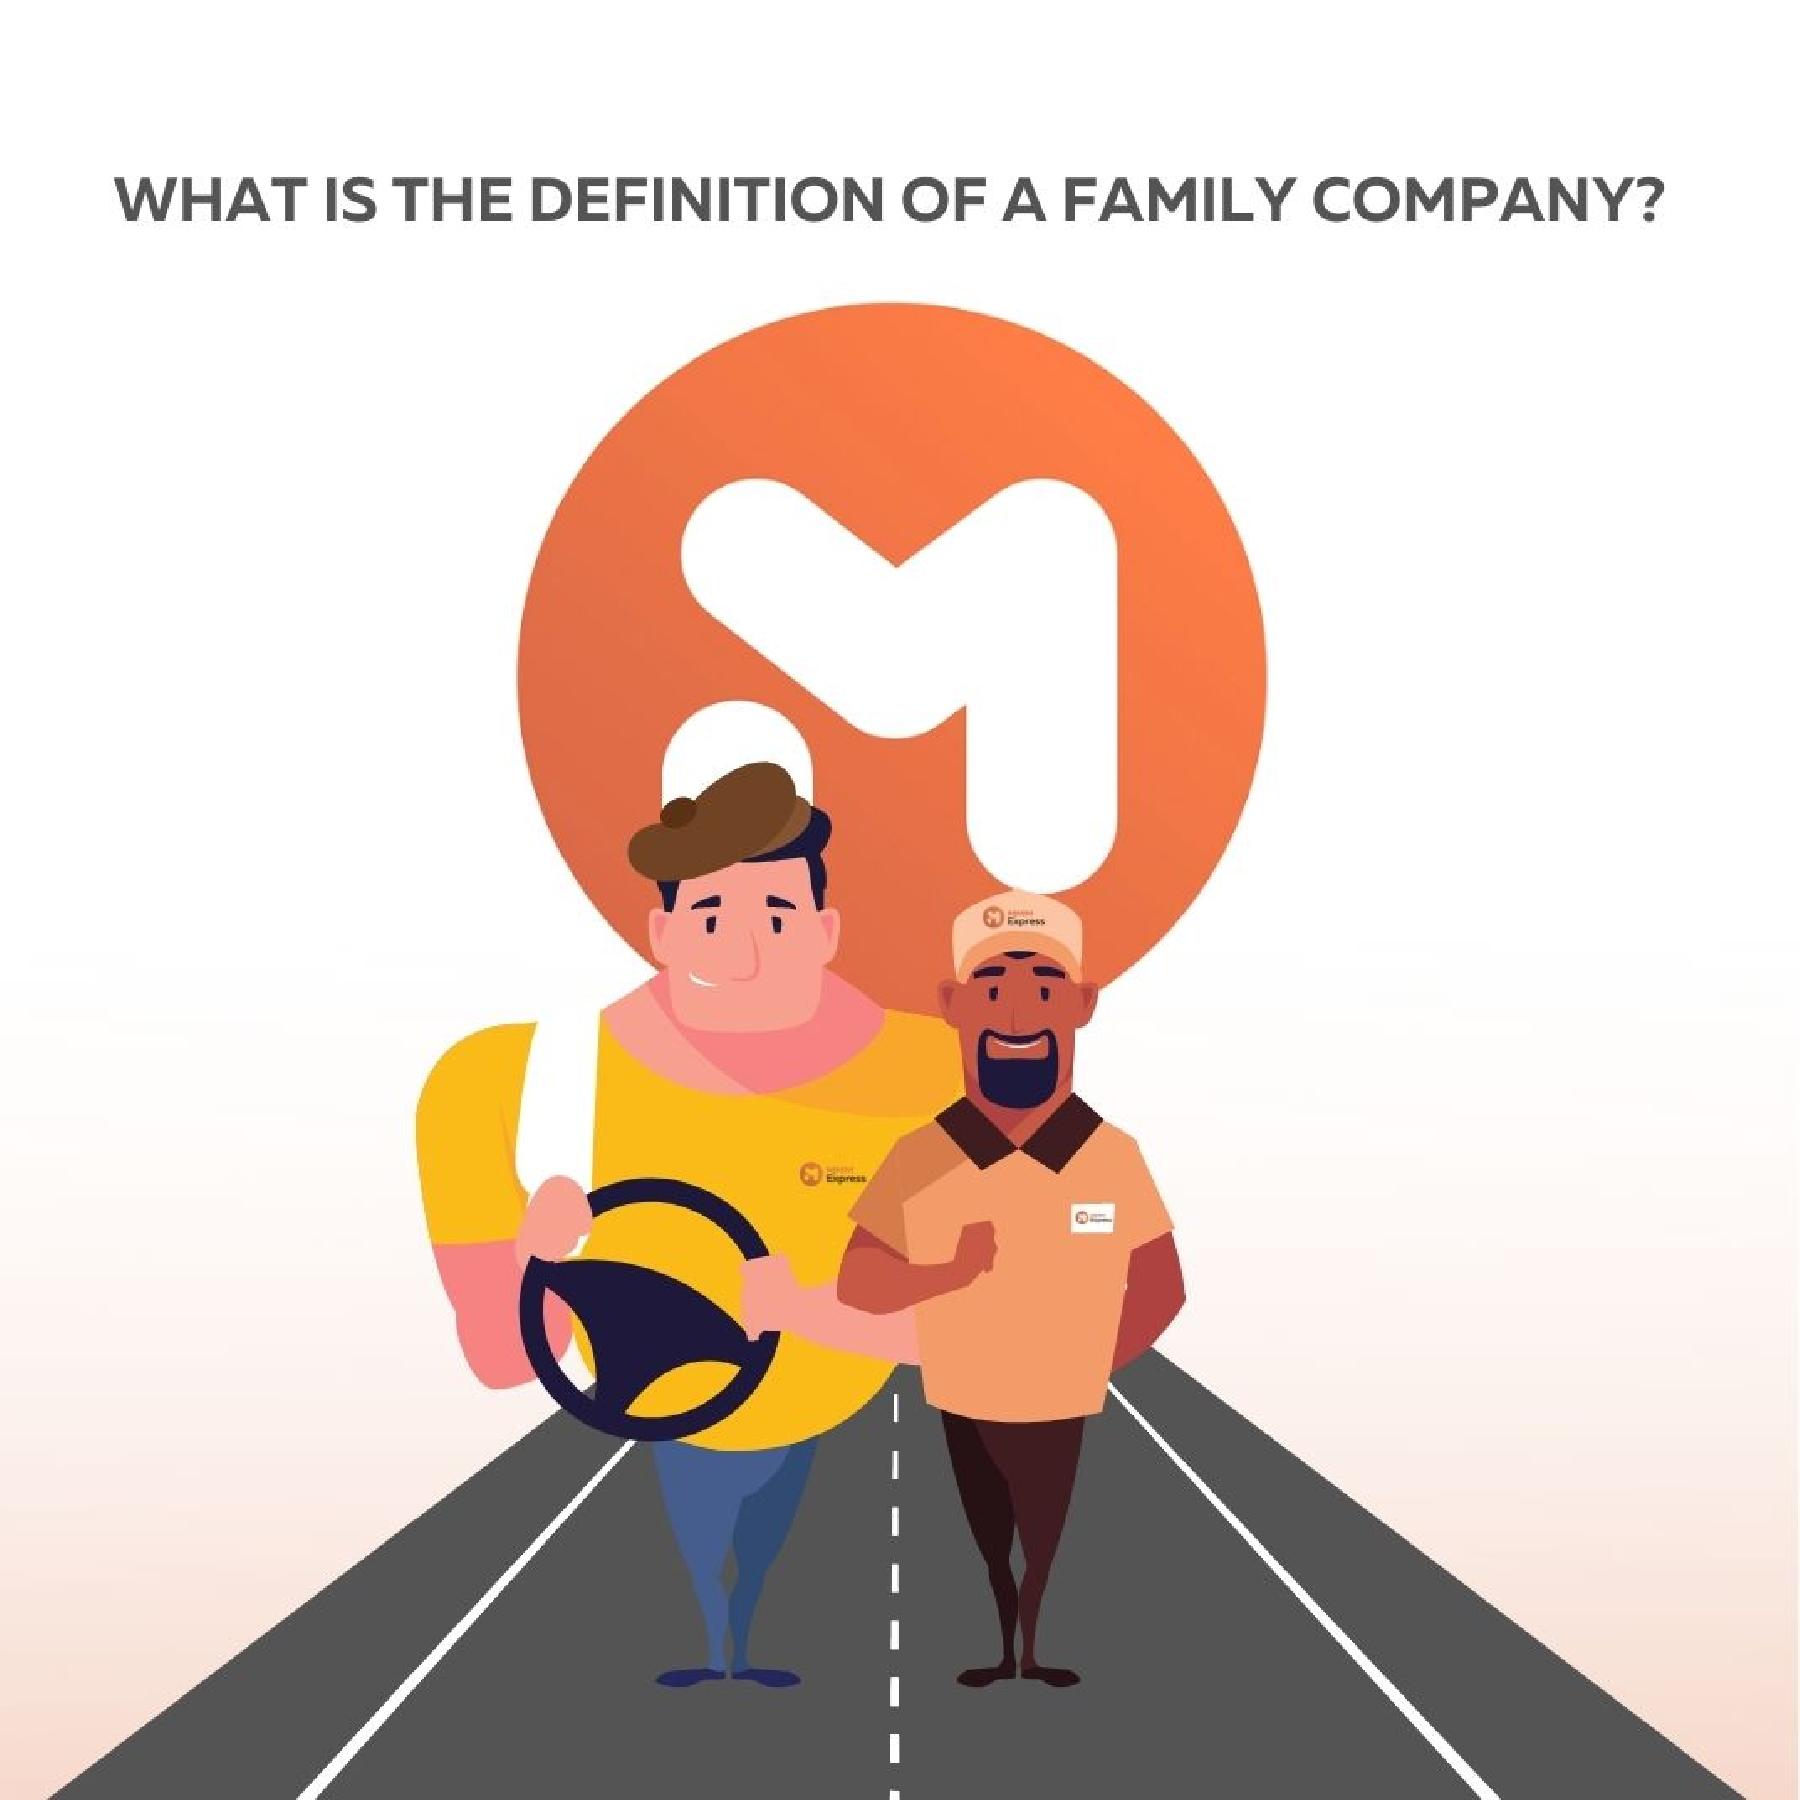 What is the definition of a family company?